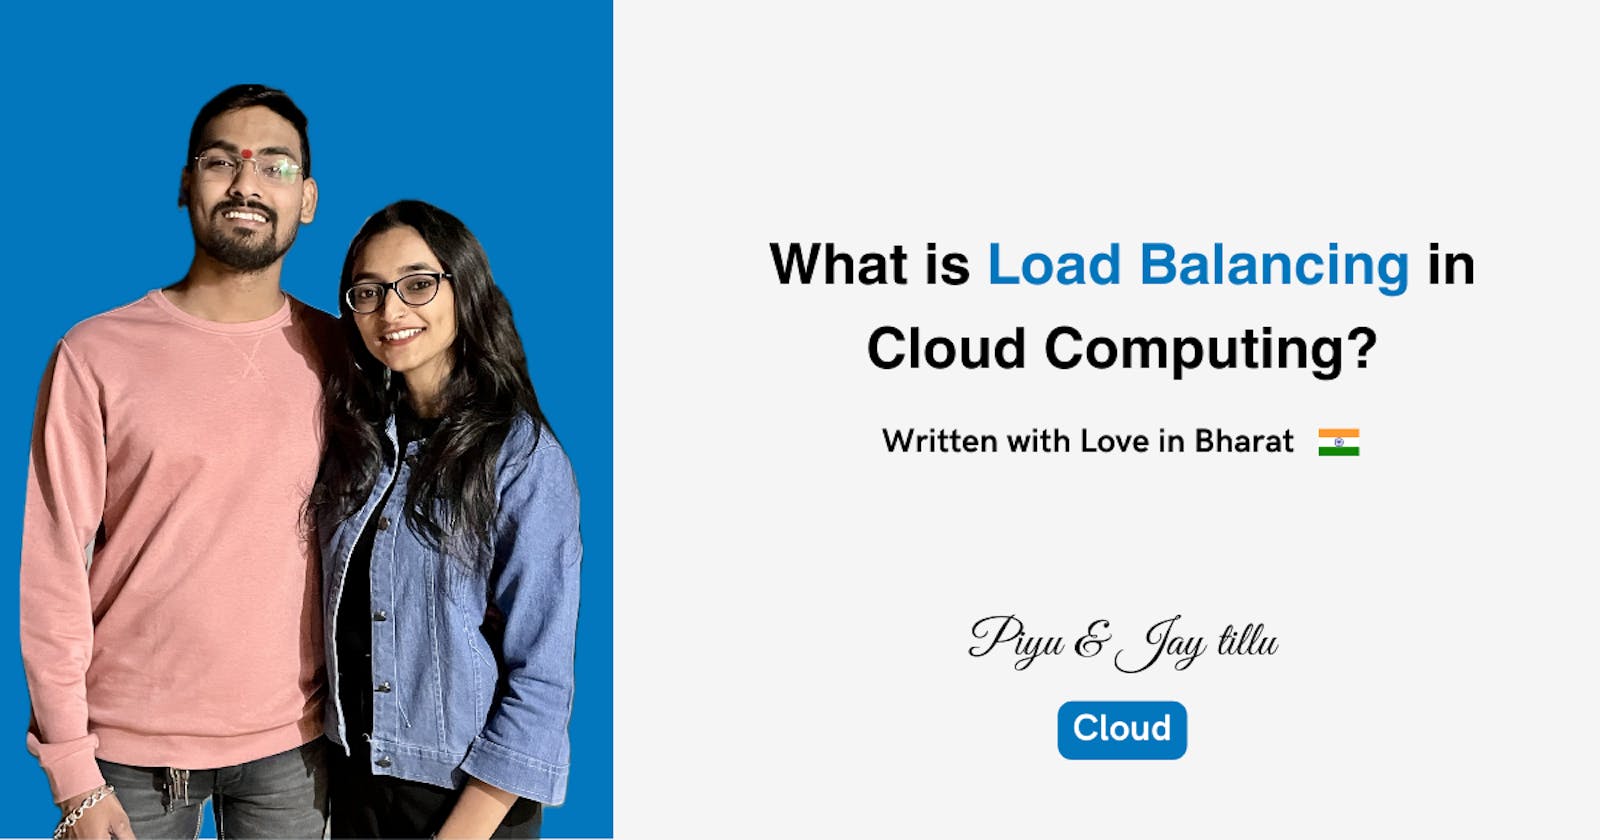 What is Load Balancing in Cloud Computing?